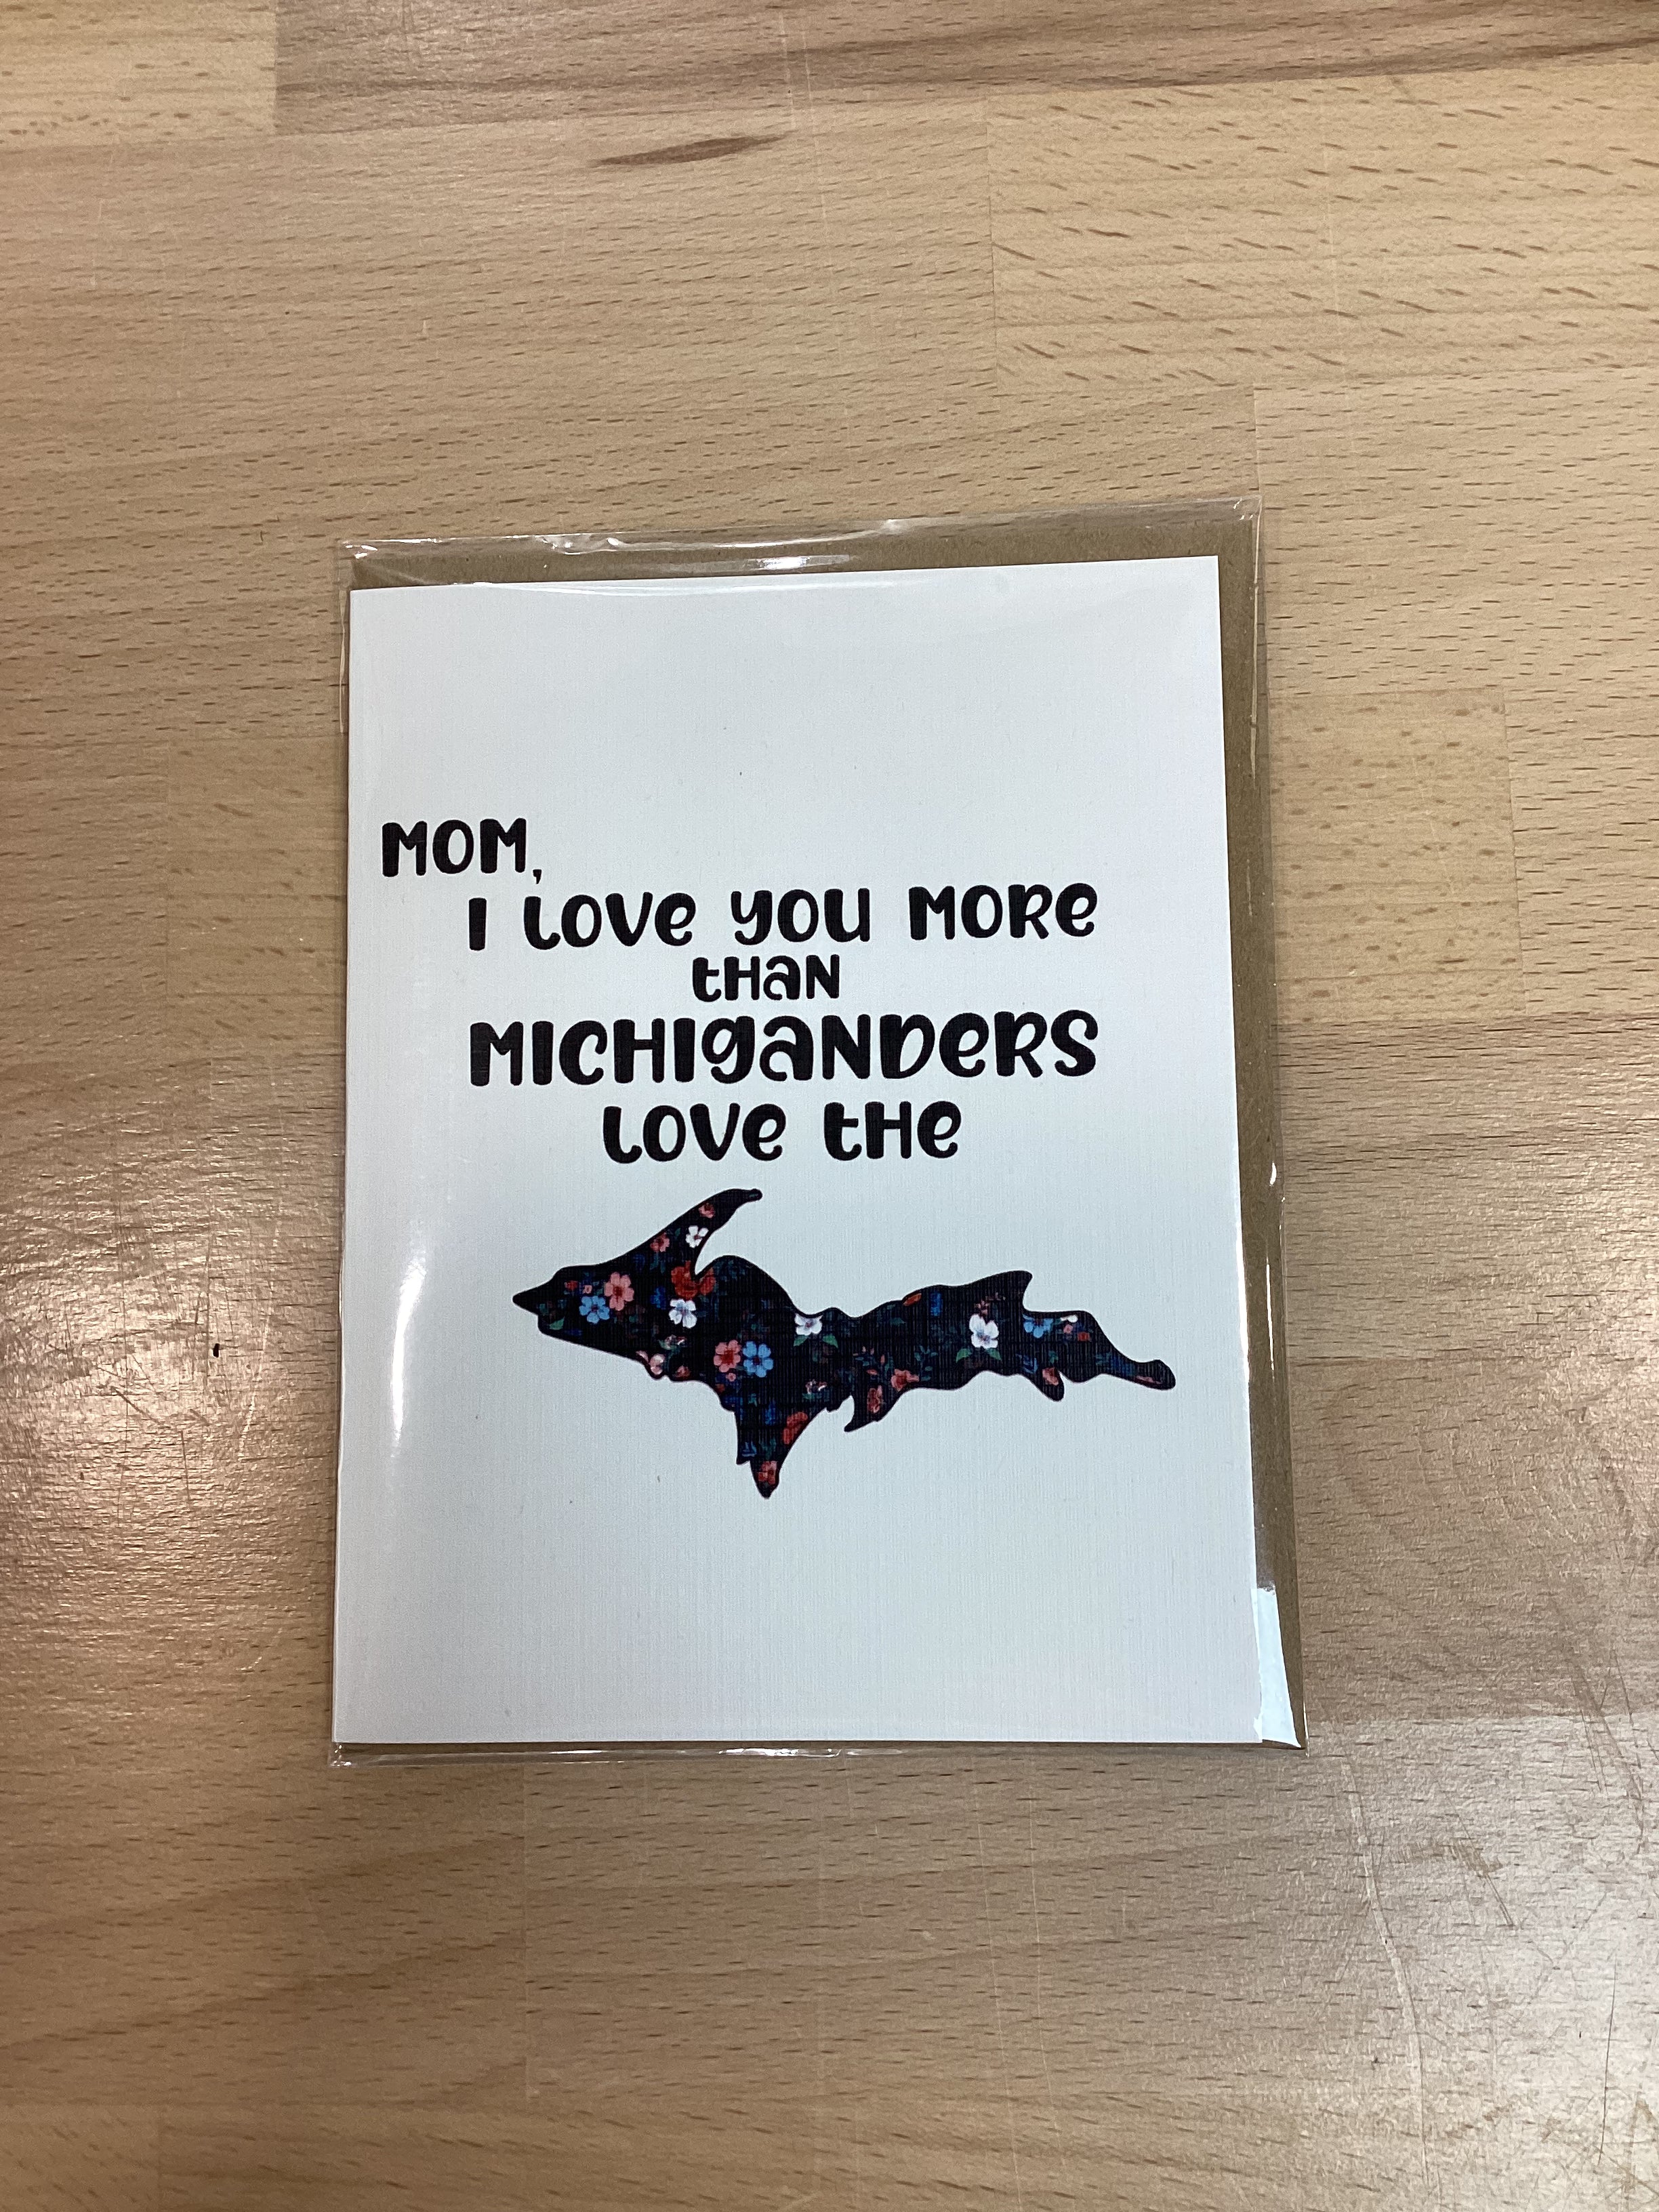 Mom, I Love You More Than Michiganders Love The UP - Michigan - Greeting Card